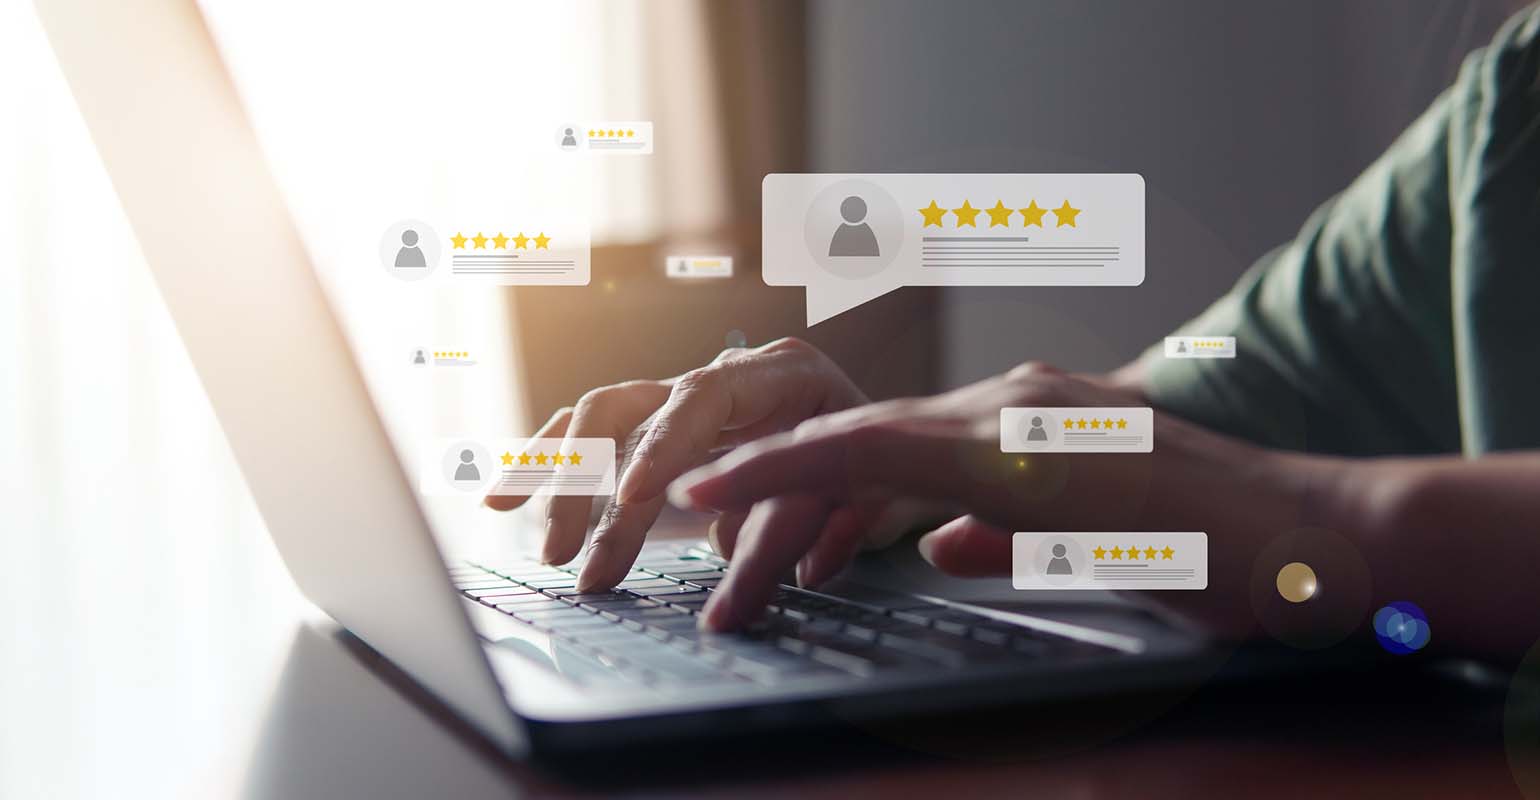 Should Advisors Be Worried About Online Reviews? It Depends.